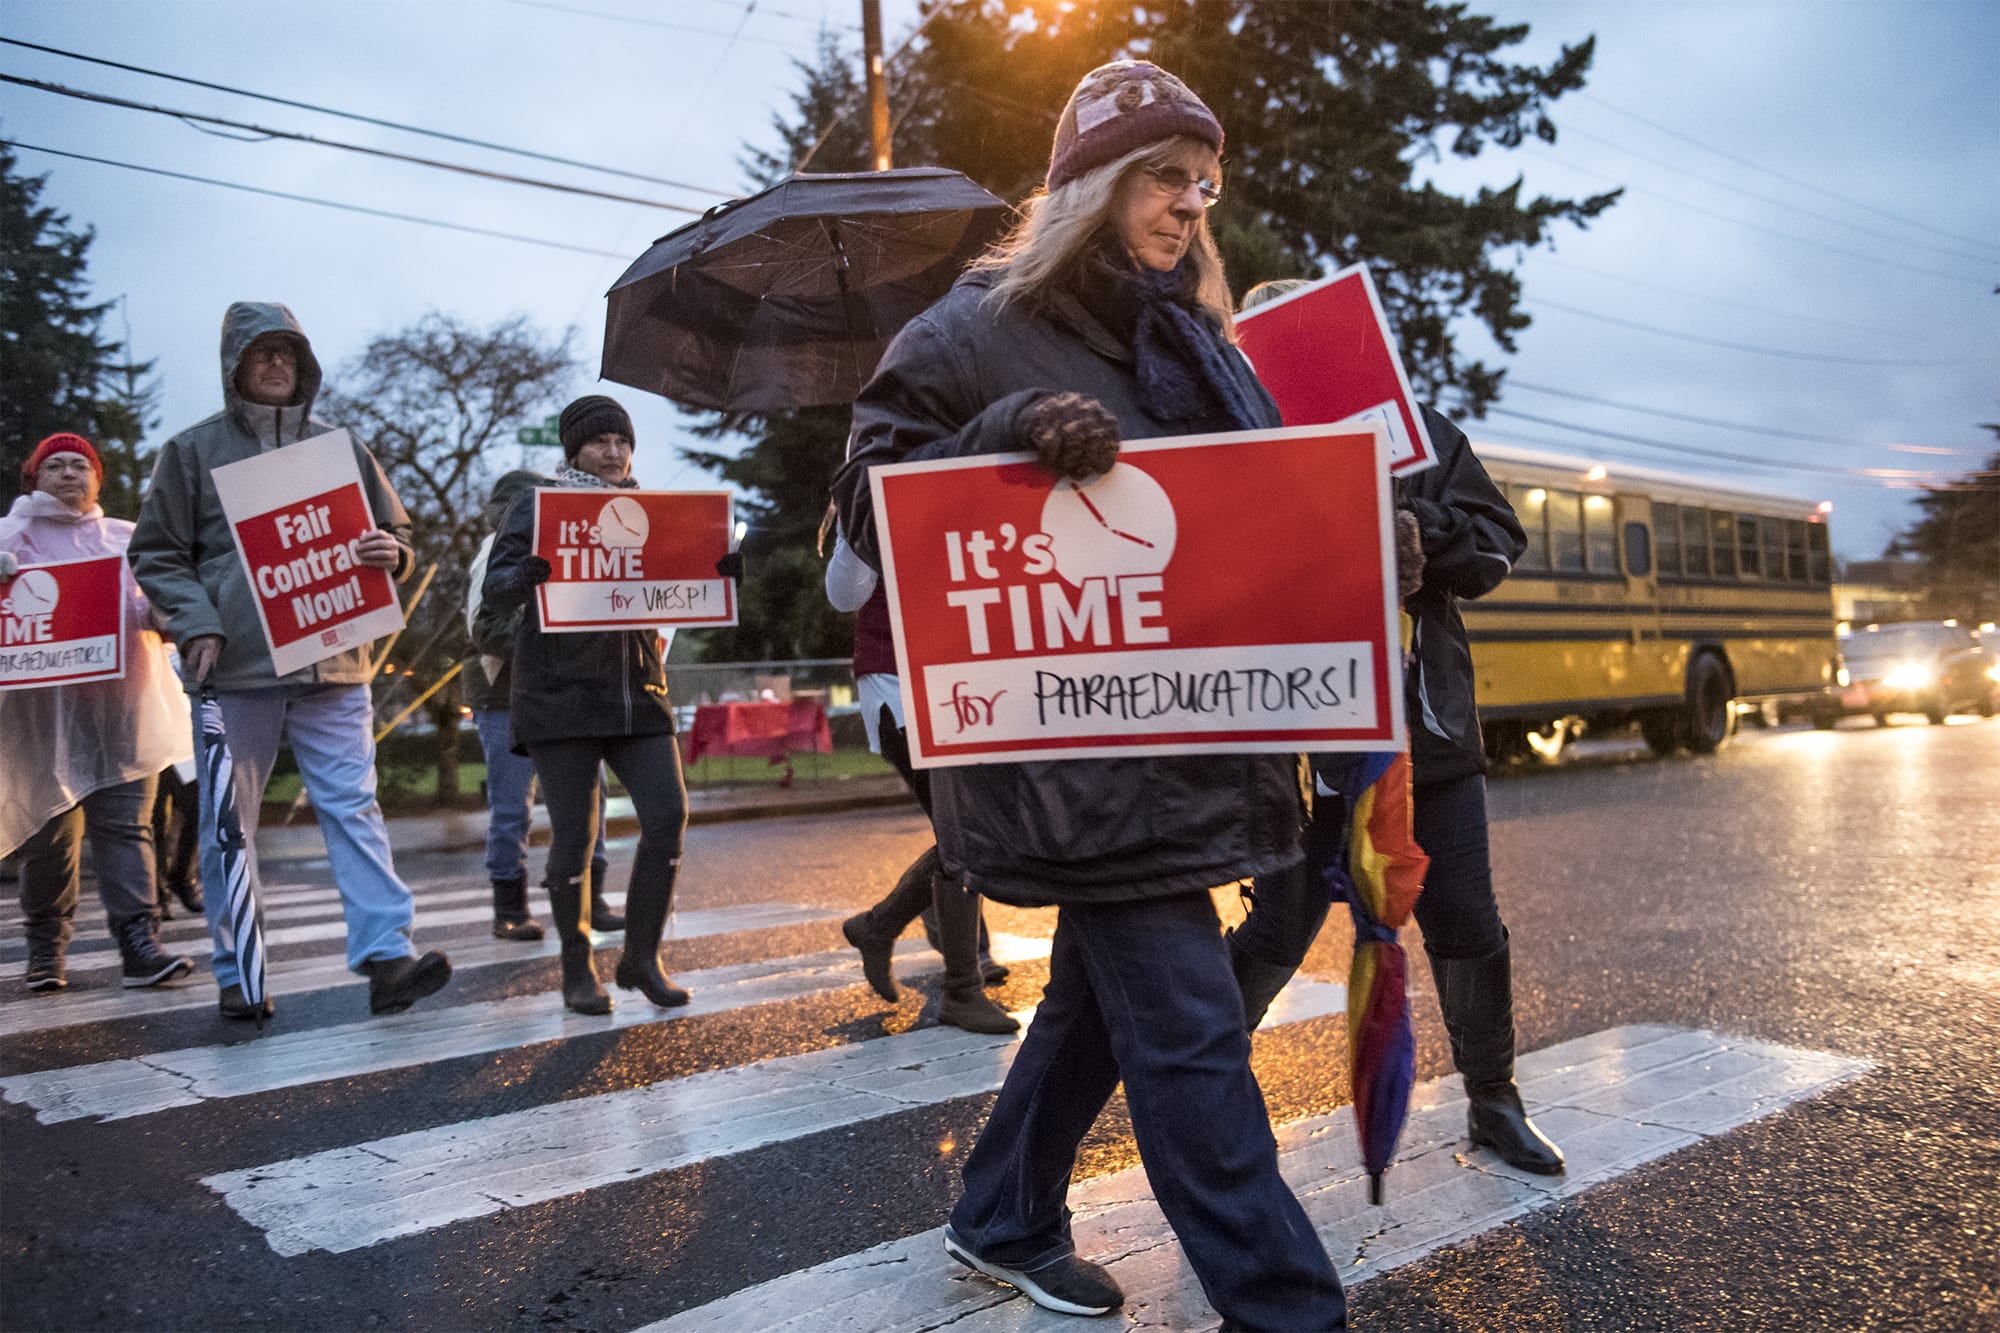 Supporters of the Vancouver Association of Education Support Professionals line the road during a rally in front of Vancouver Public Schools offices on Tuesday night.